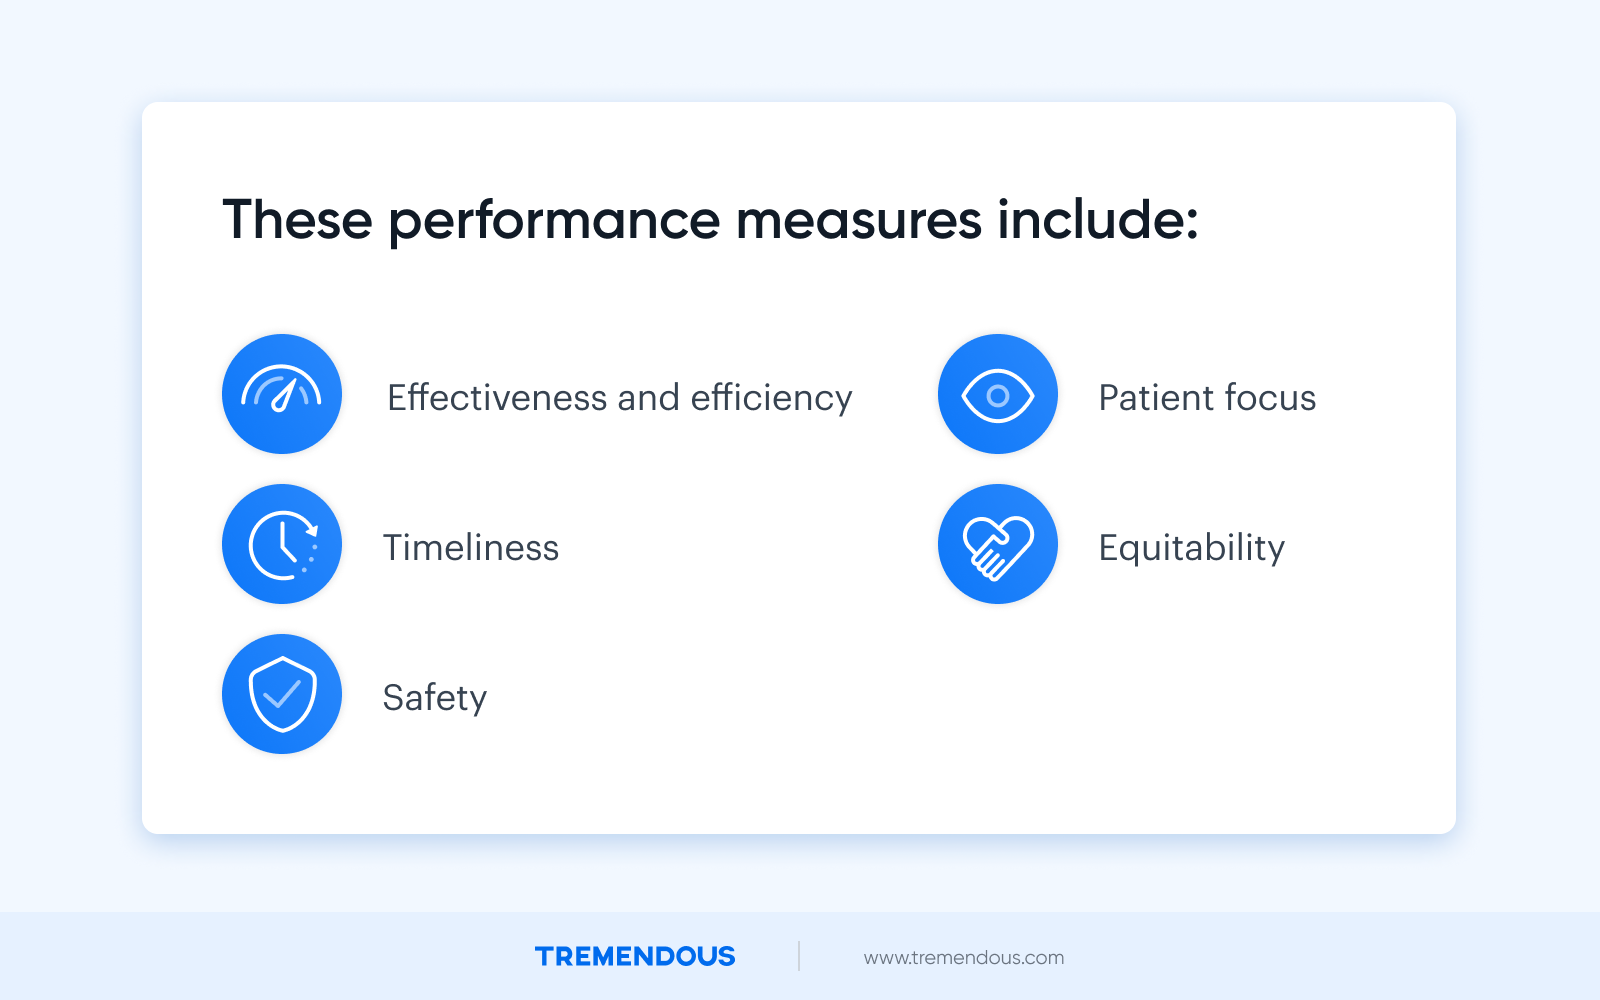 Text reads: "These performance measures include: effectiveness and efficiency, timeliness, safety, patient focus, and equitability."